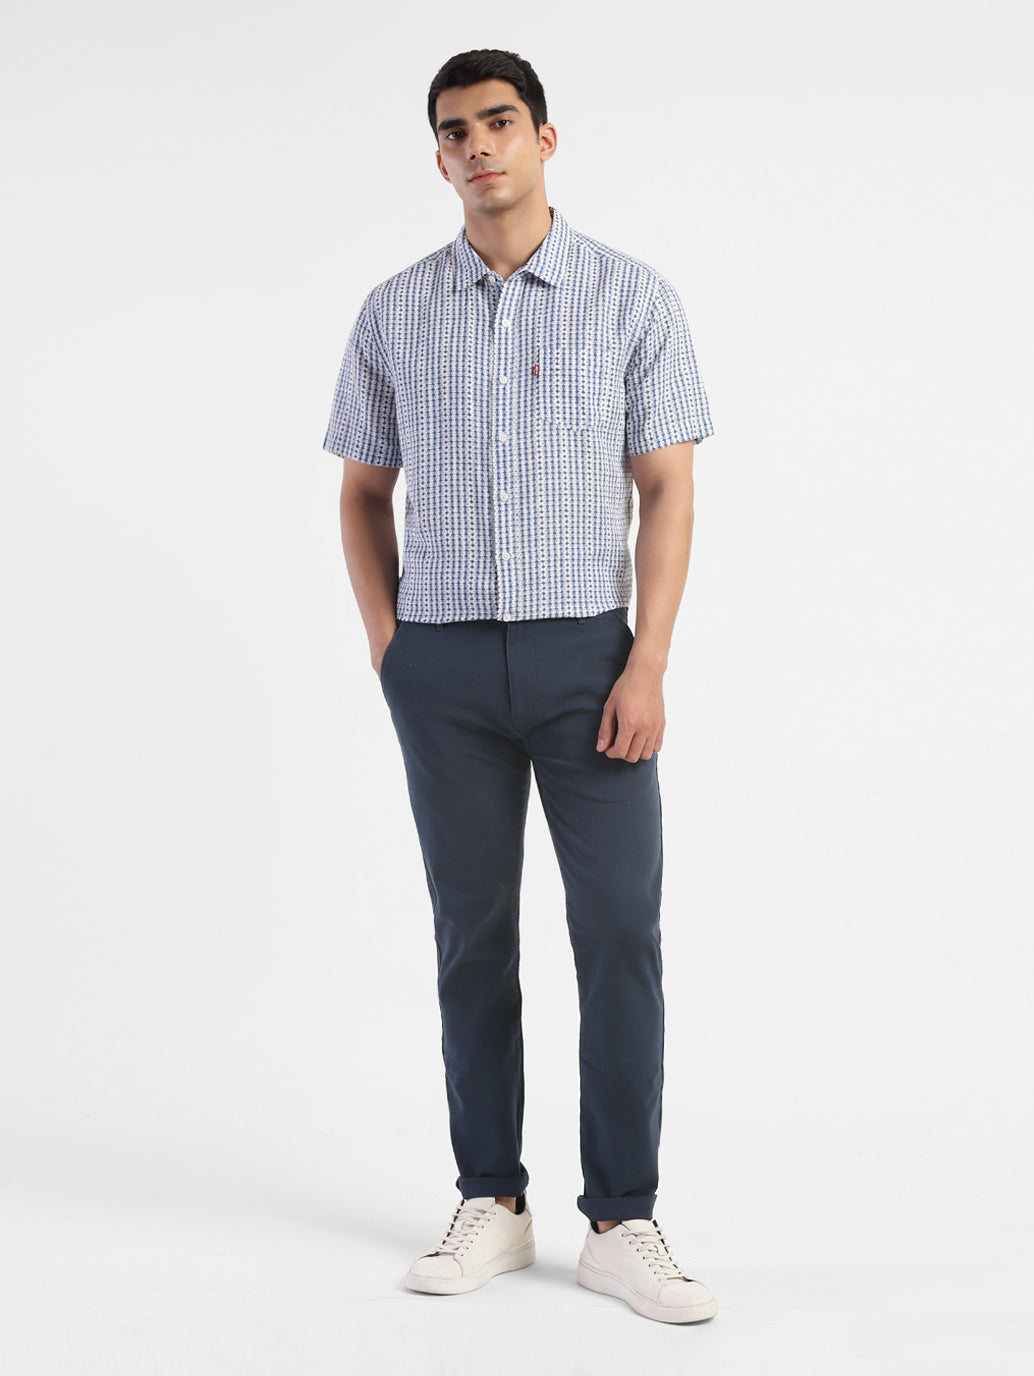 Men's Slim Tapered Fit Trousers – Levis India Store